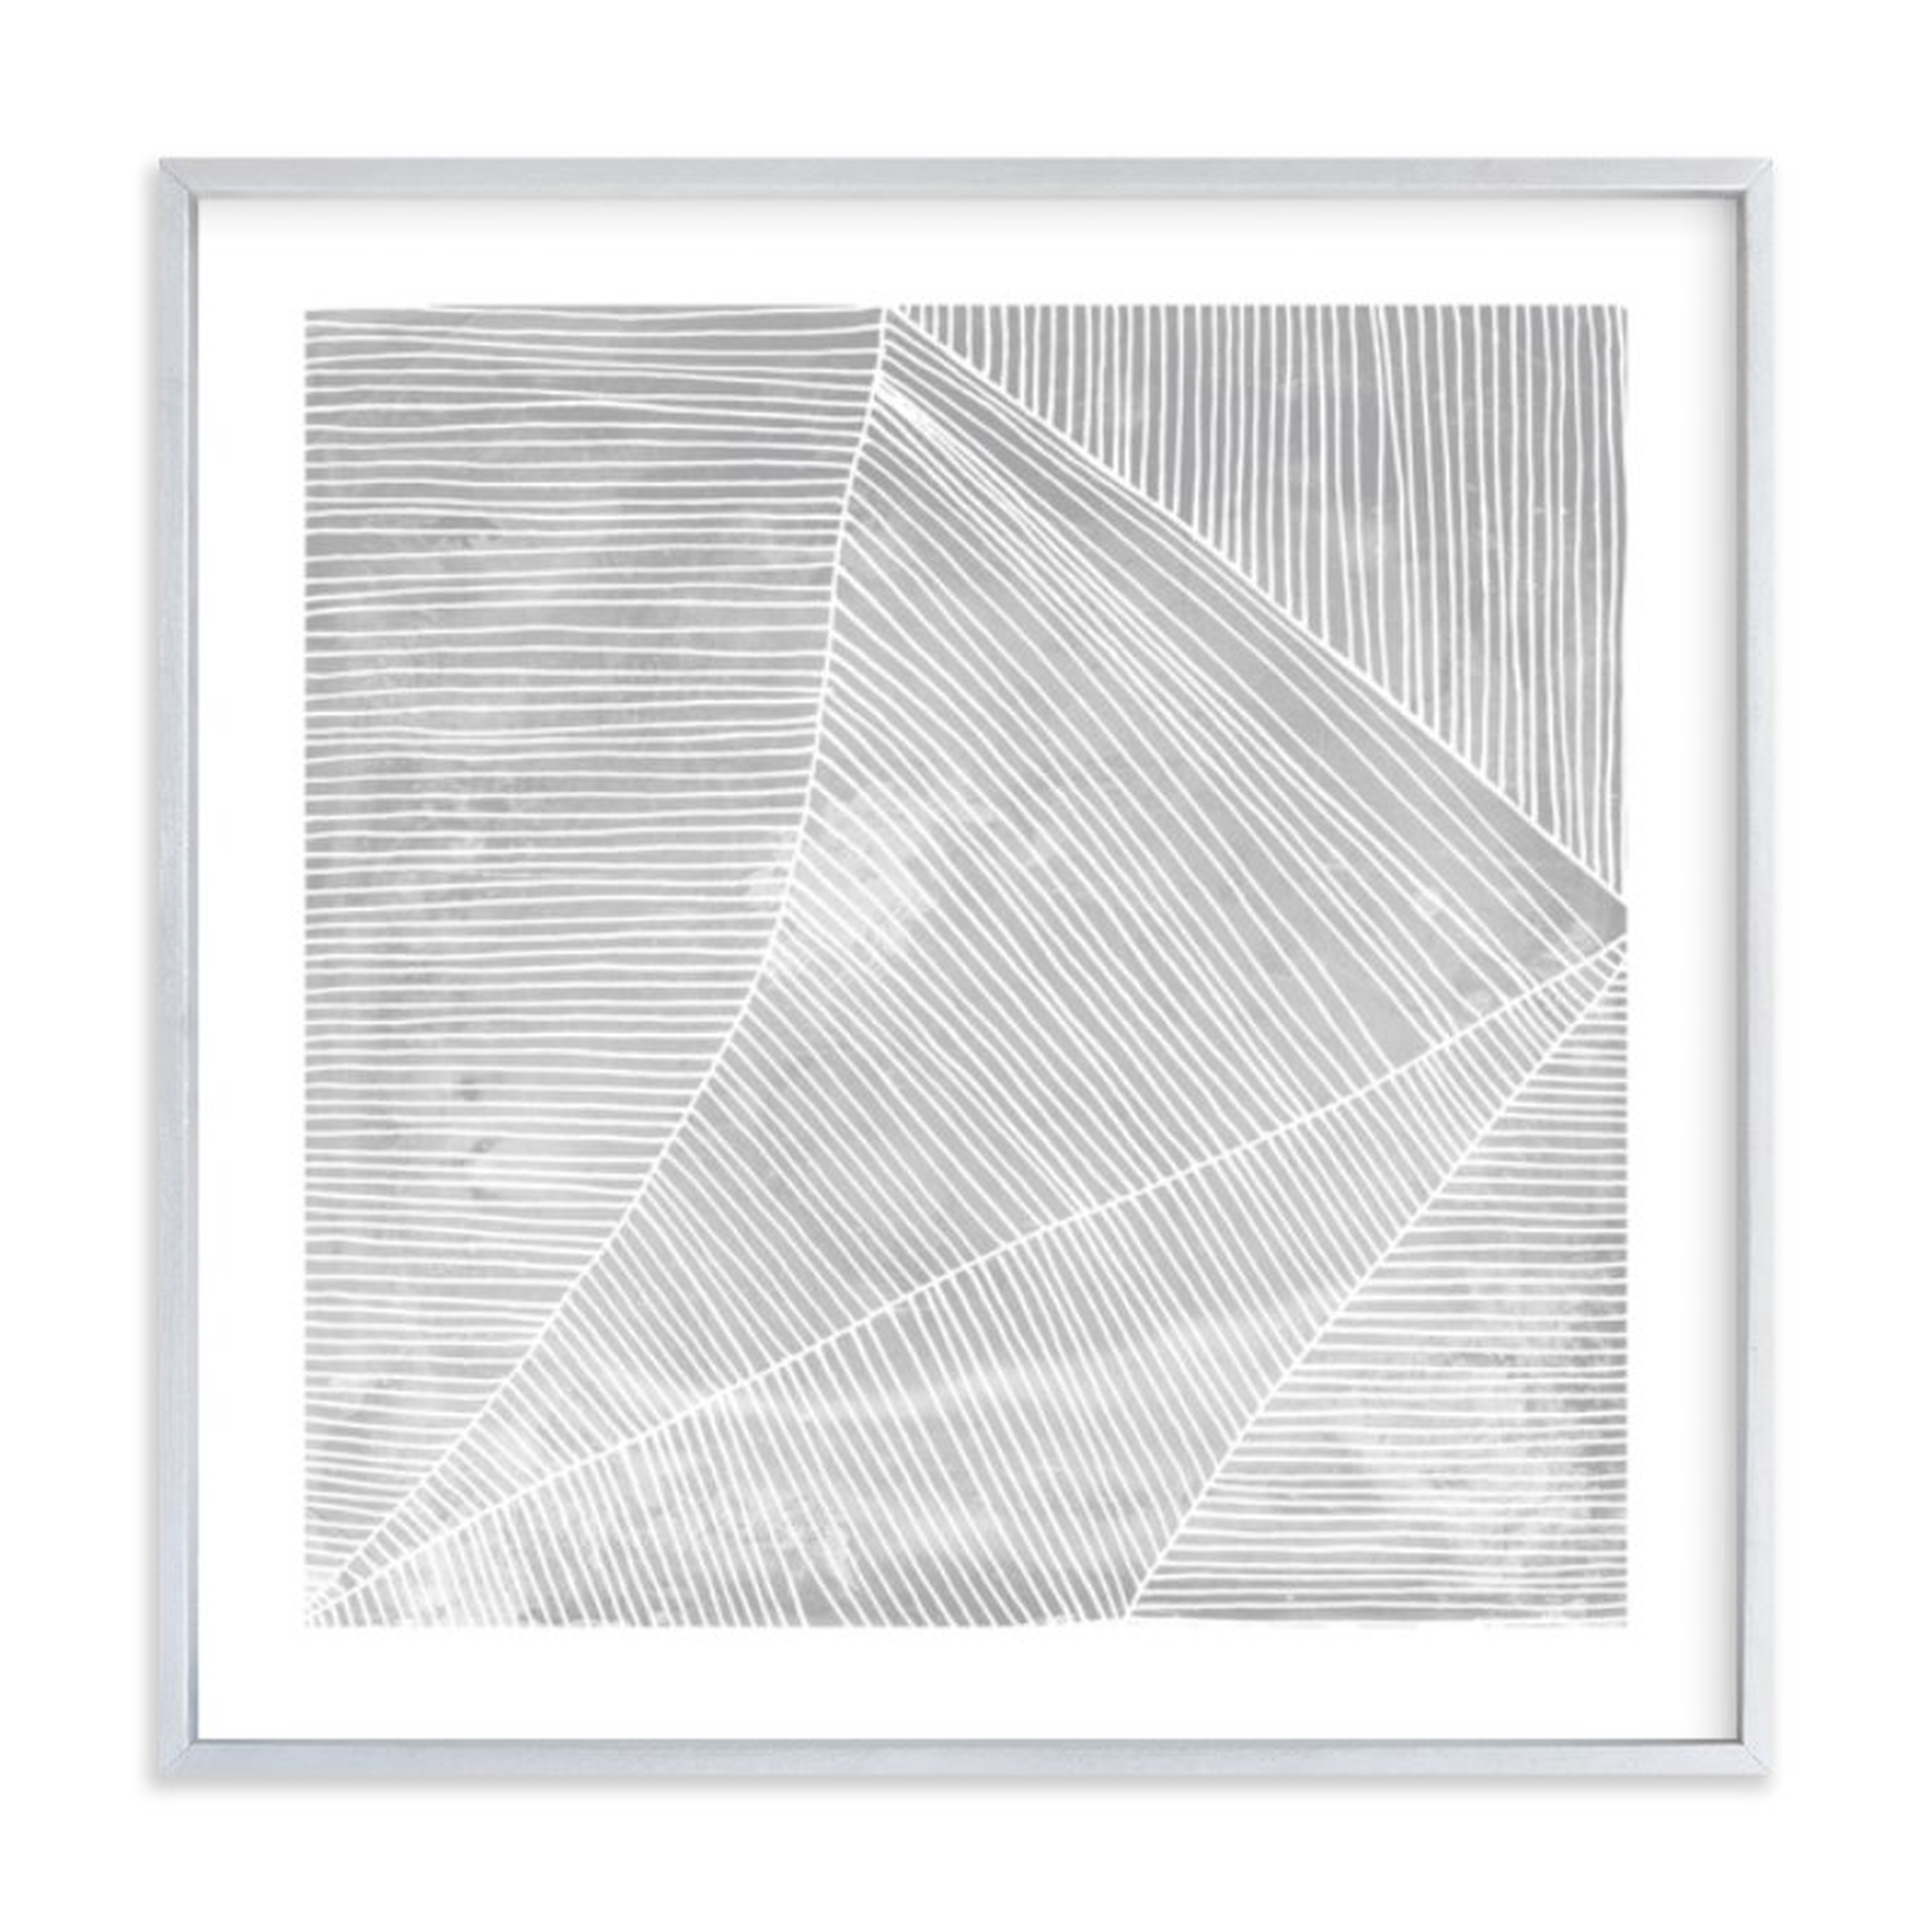 Hide Framed Art, 16" x 16" in Brushed Silver - Chic metal frame, with a brushed silver finish - Minted